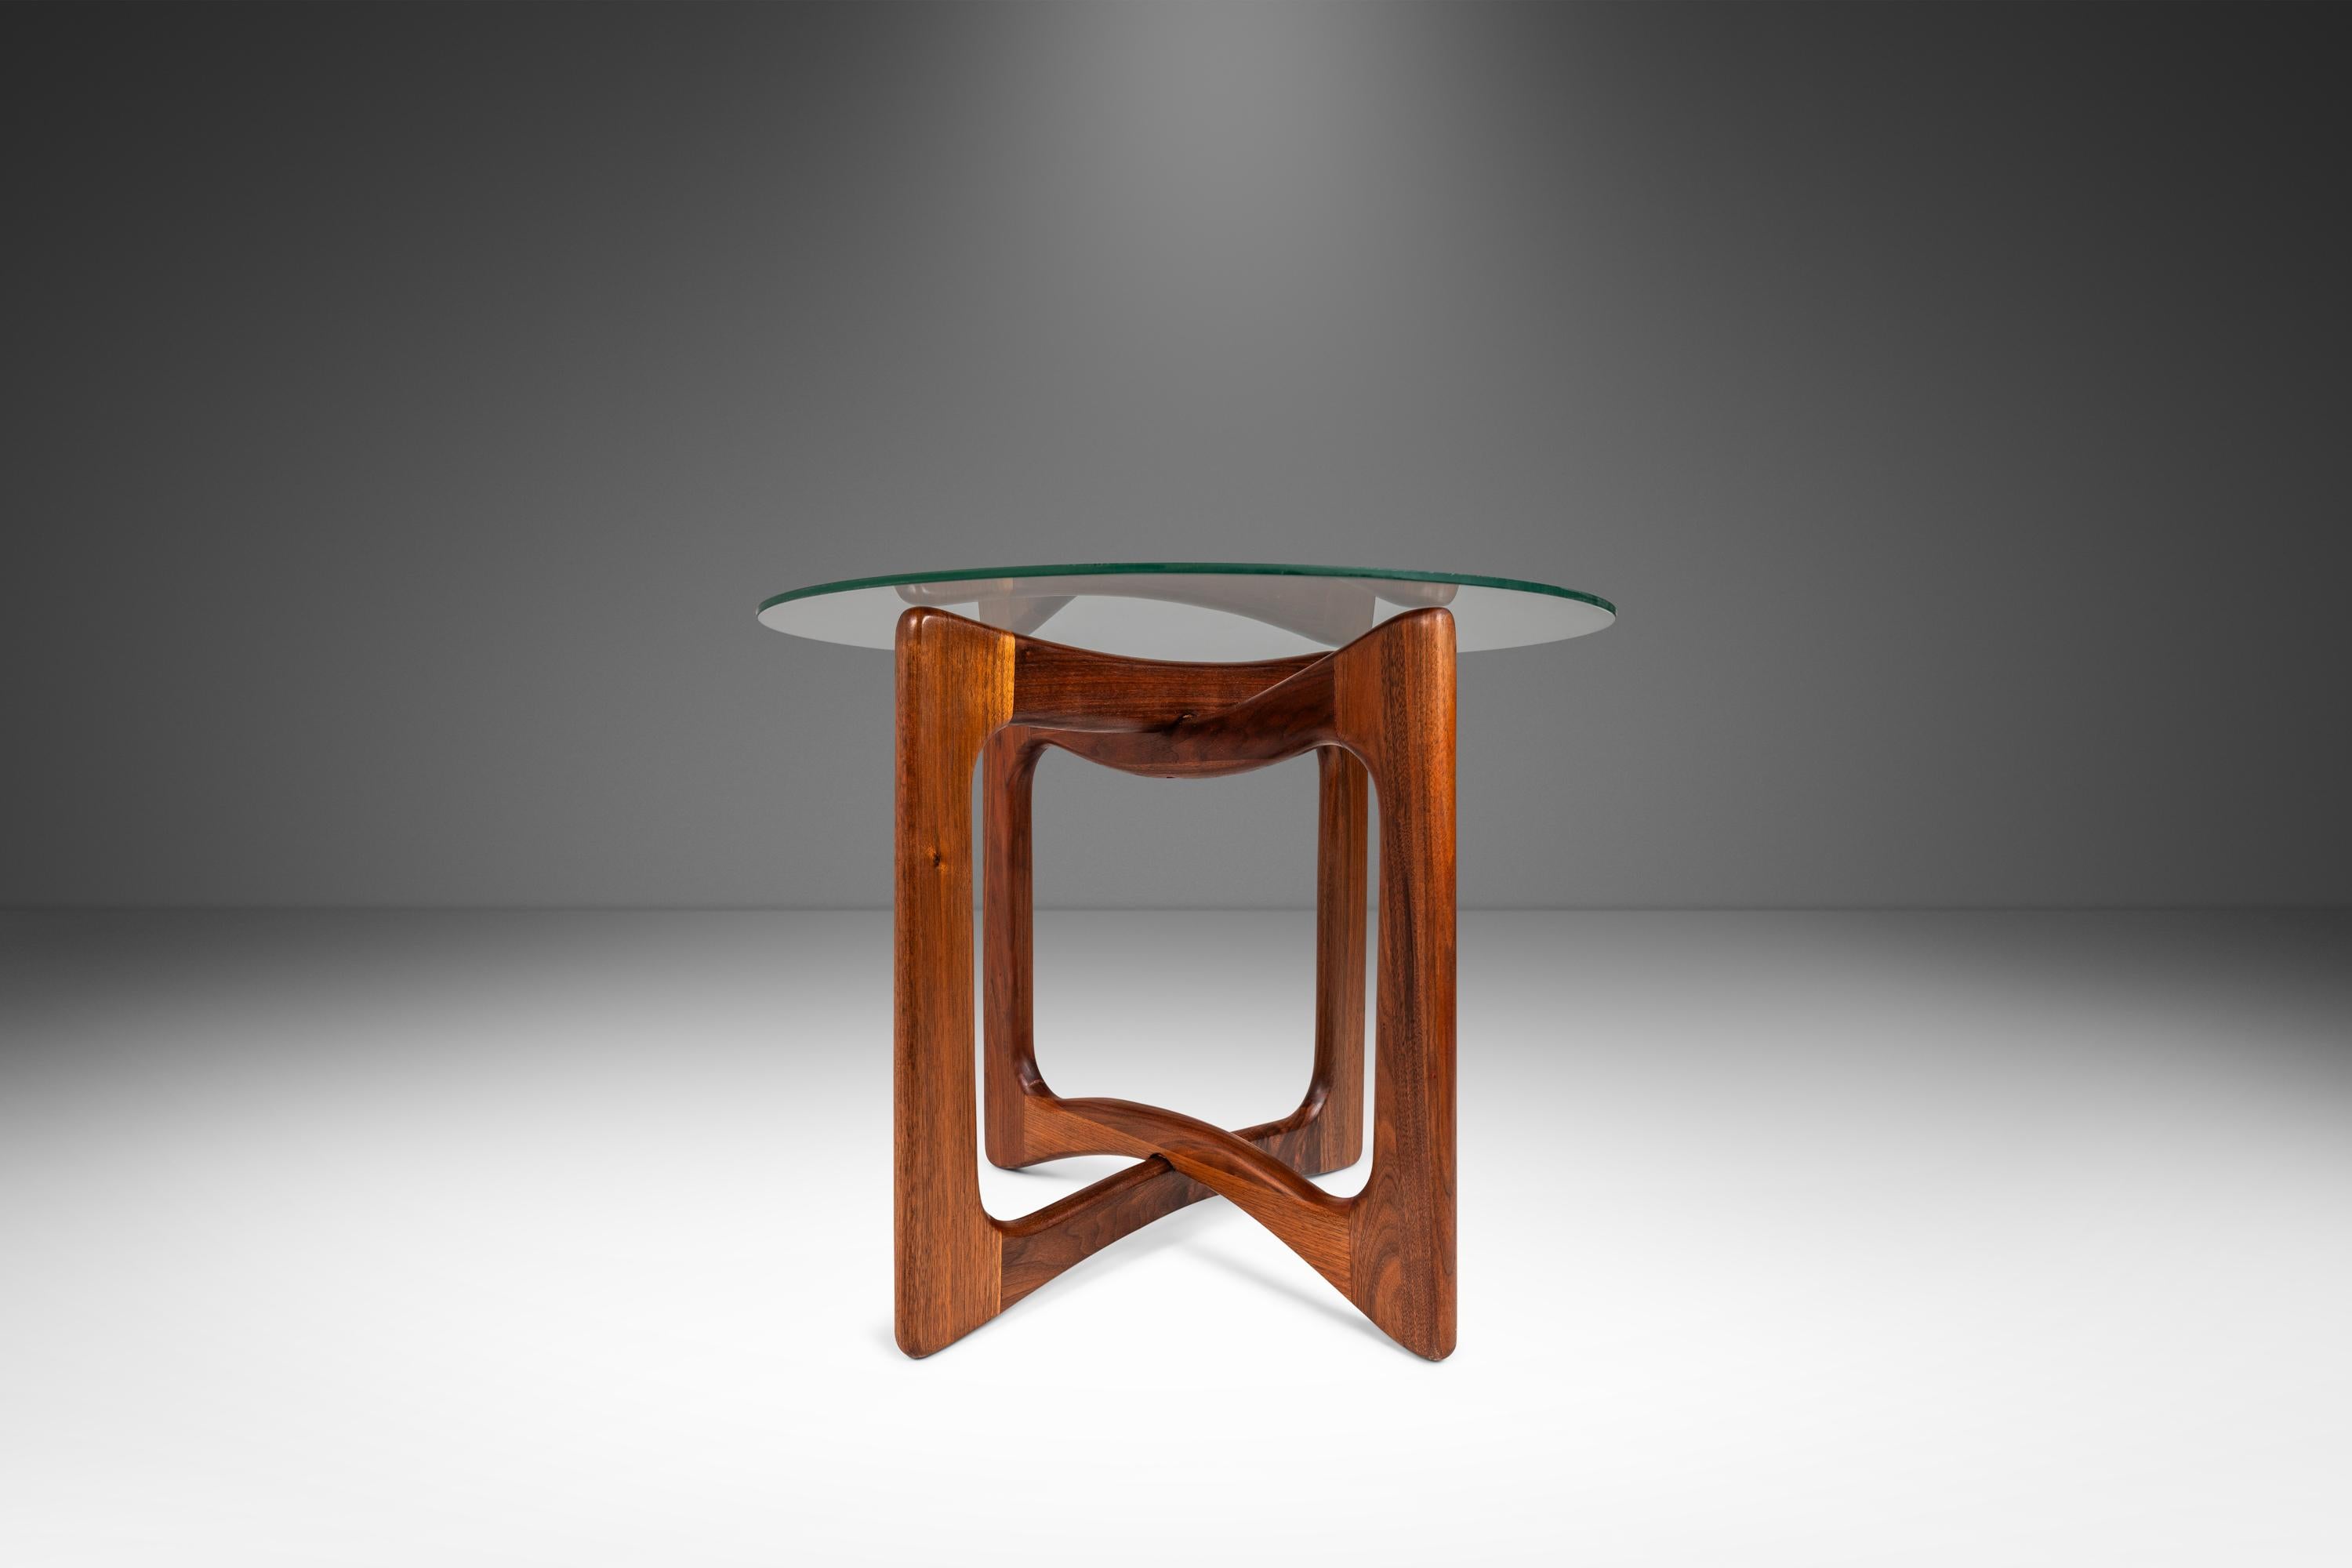 Mid-20th Century Walnut Side Table, Glass Top, by Adrian Pearsall  for Craft Associates, c. 1960